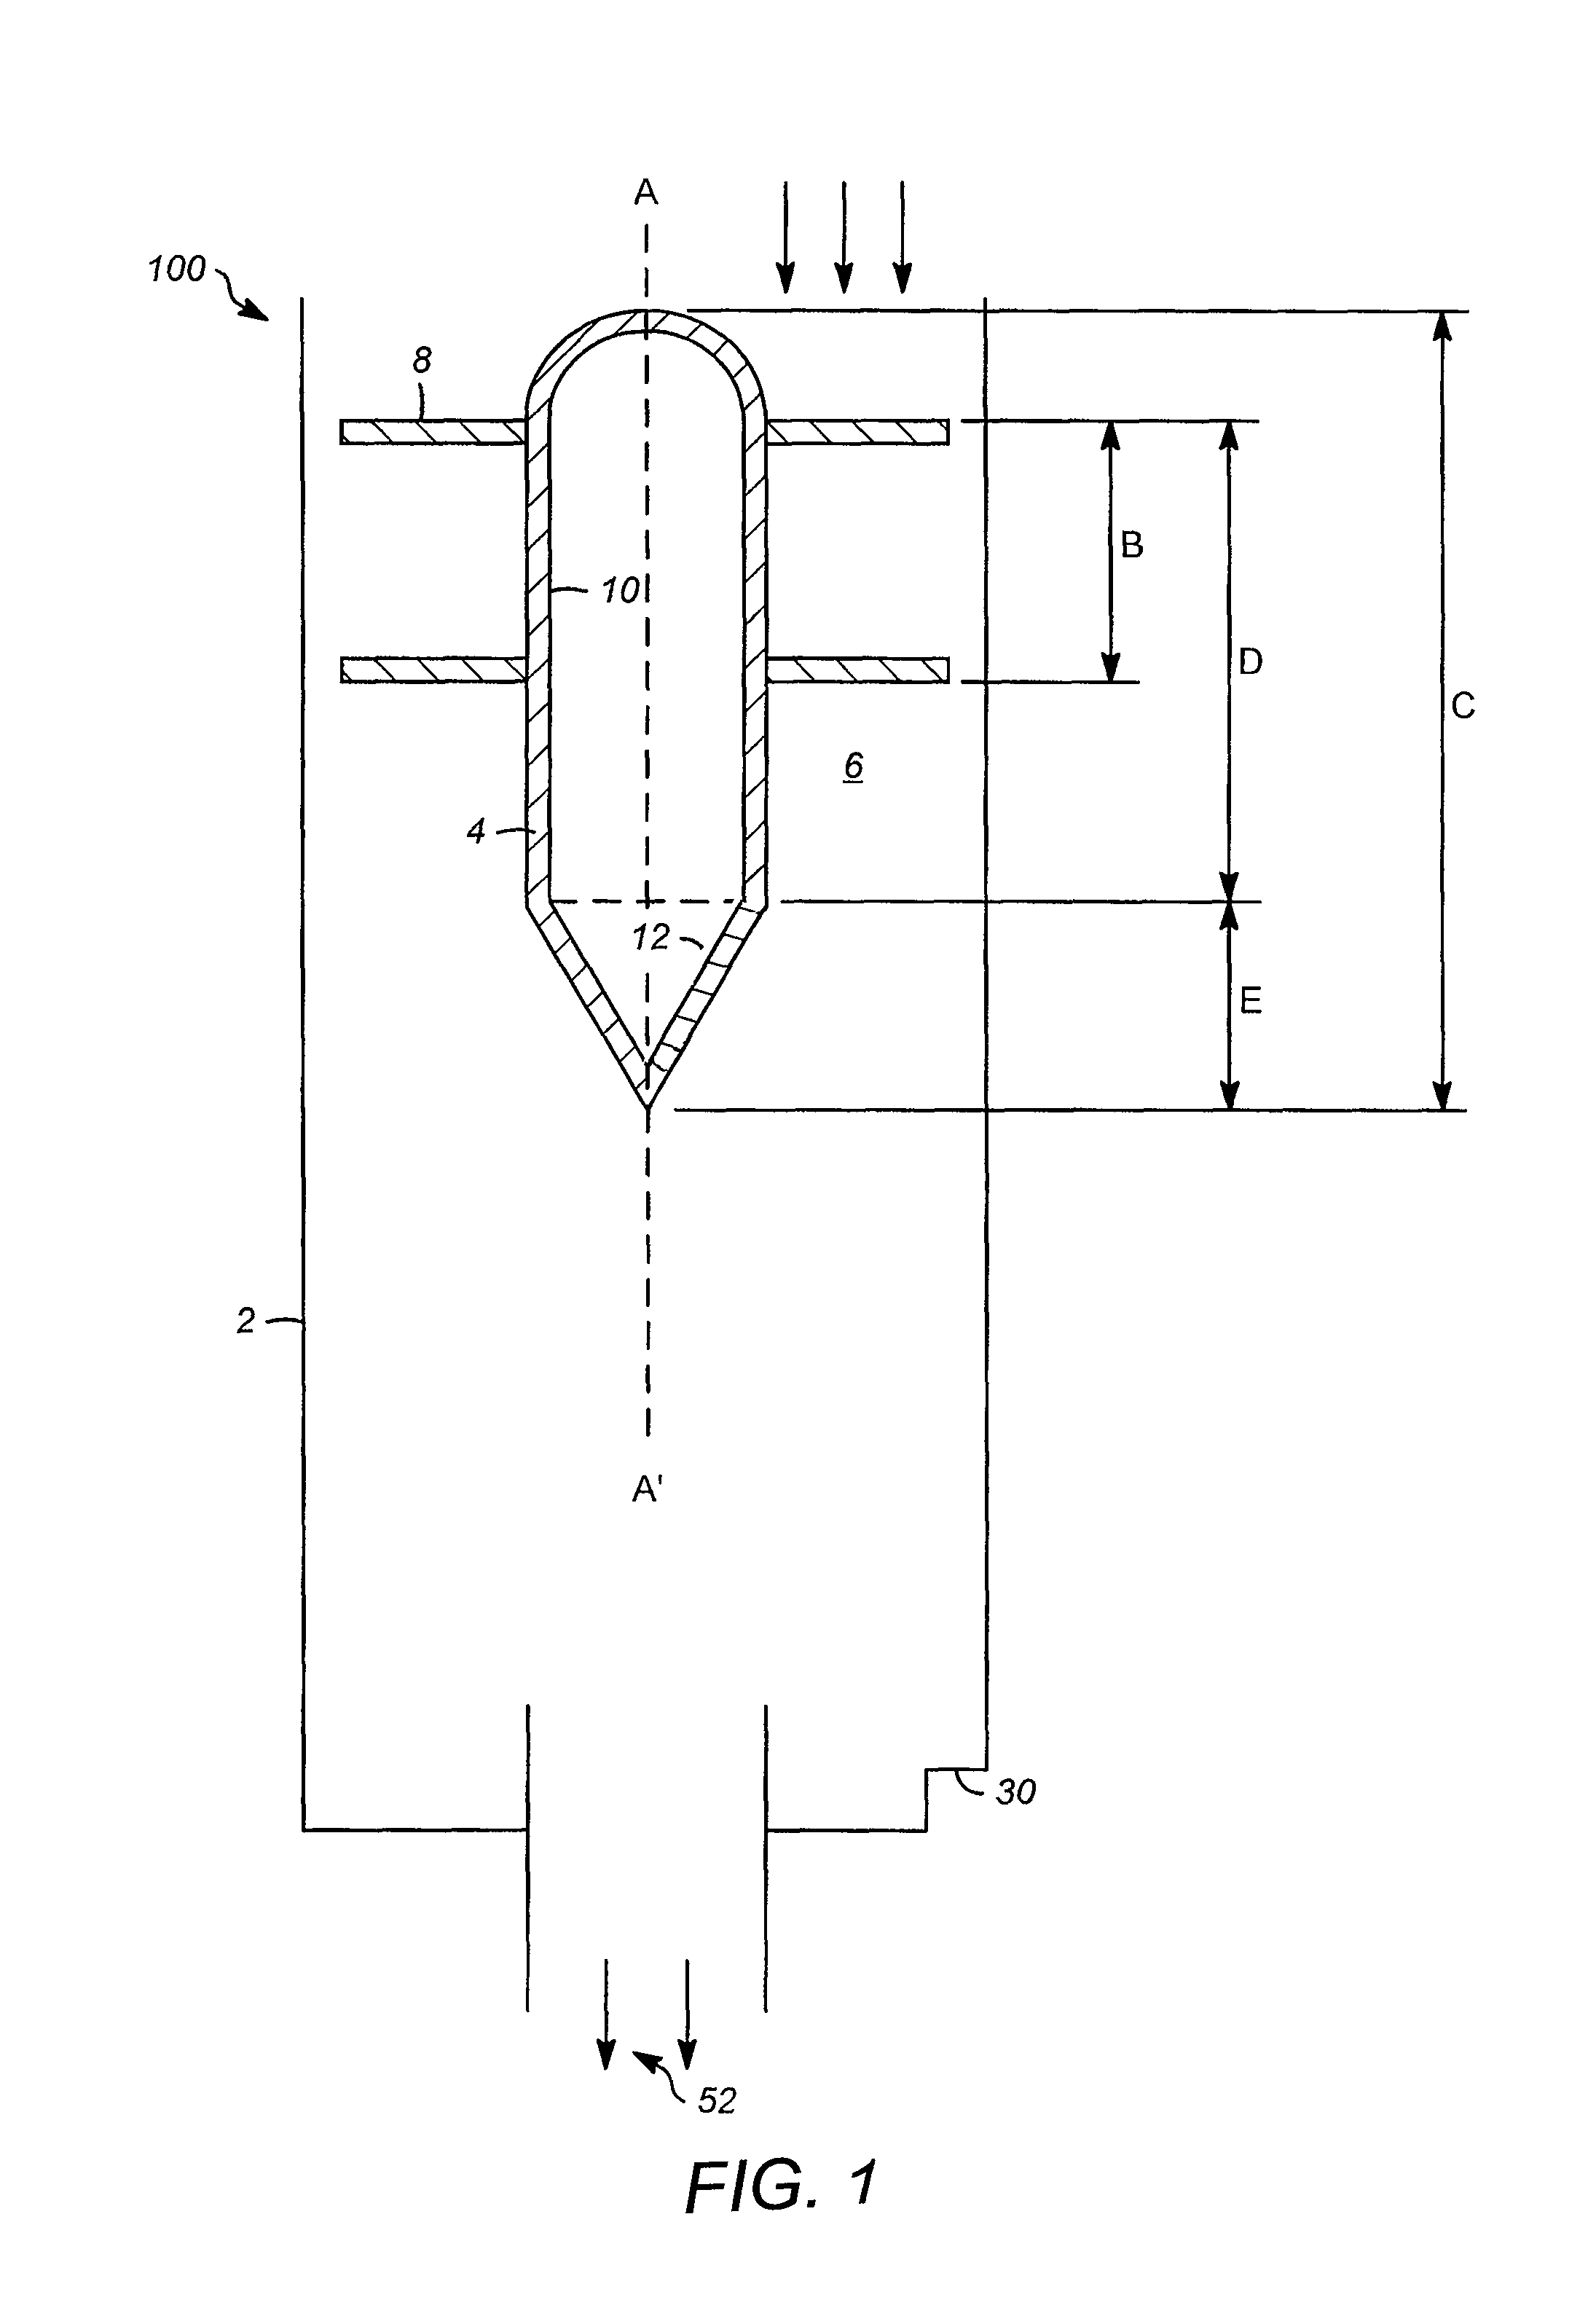 Apparatuses and methods for gas-solid separations using cyclones